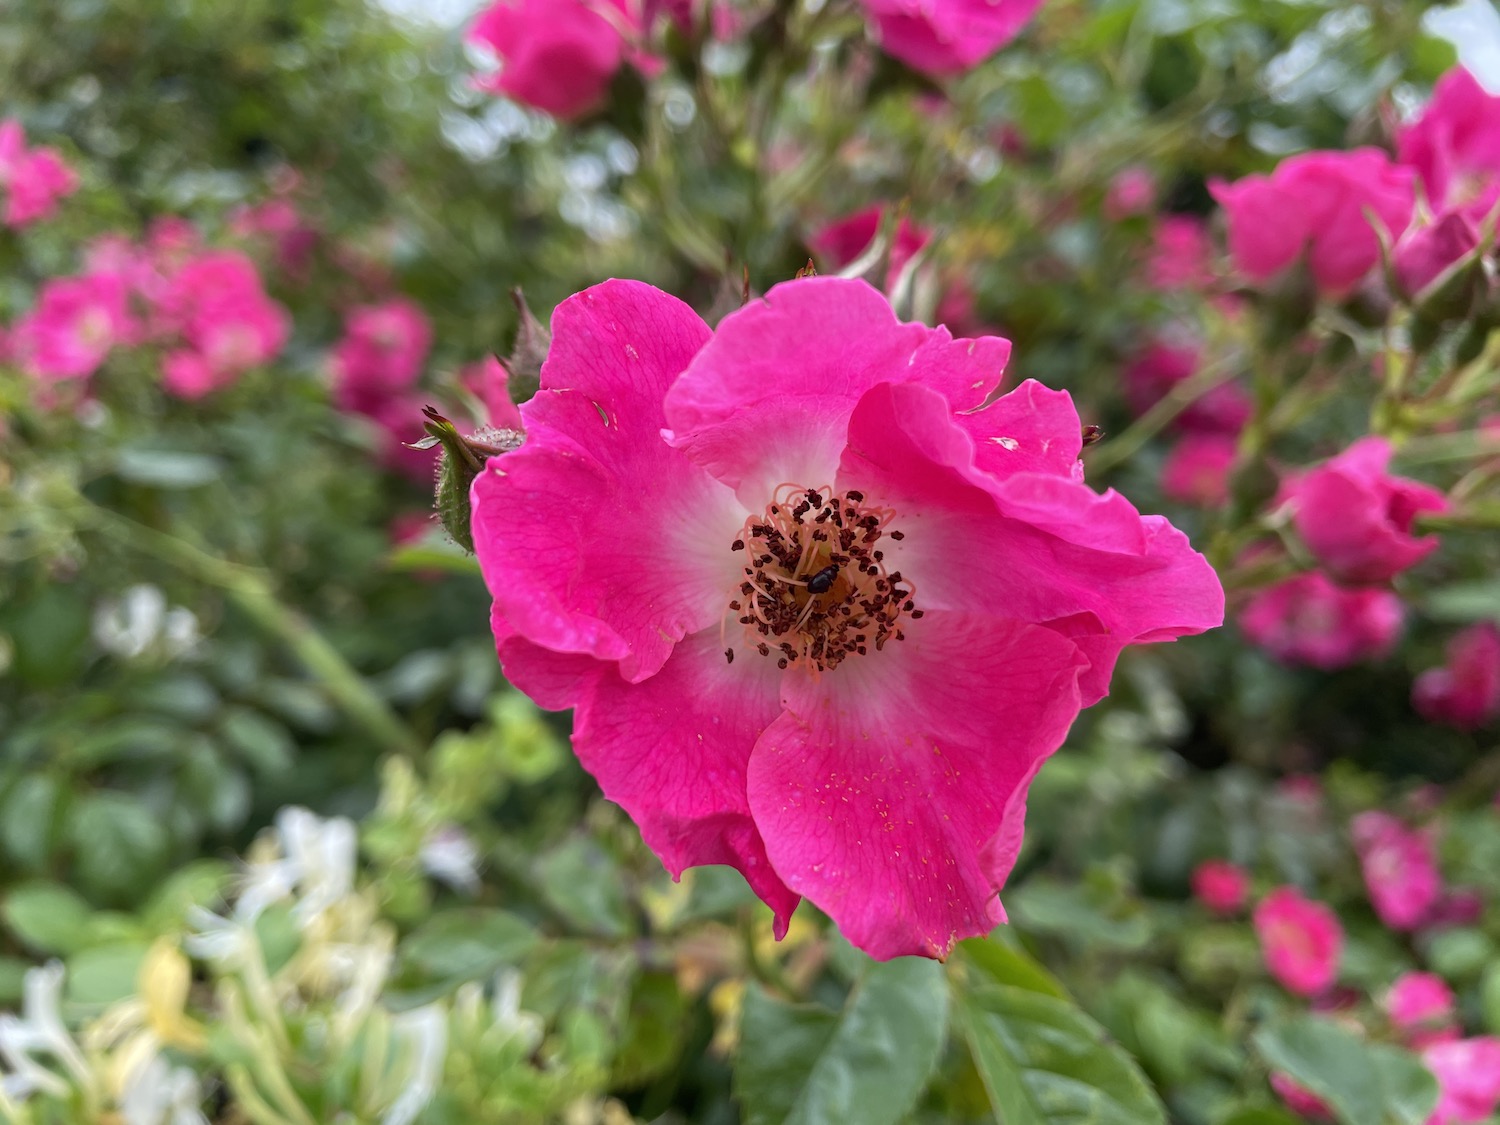 Photo of a pink flower taken with the iPhone 12 Pro